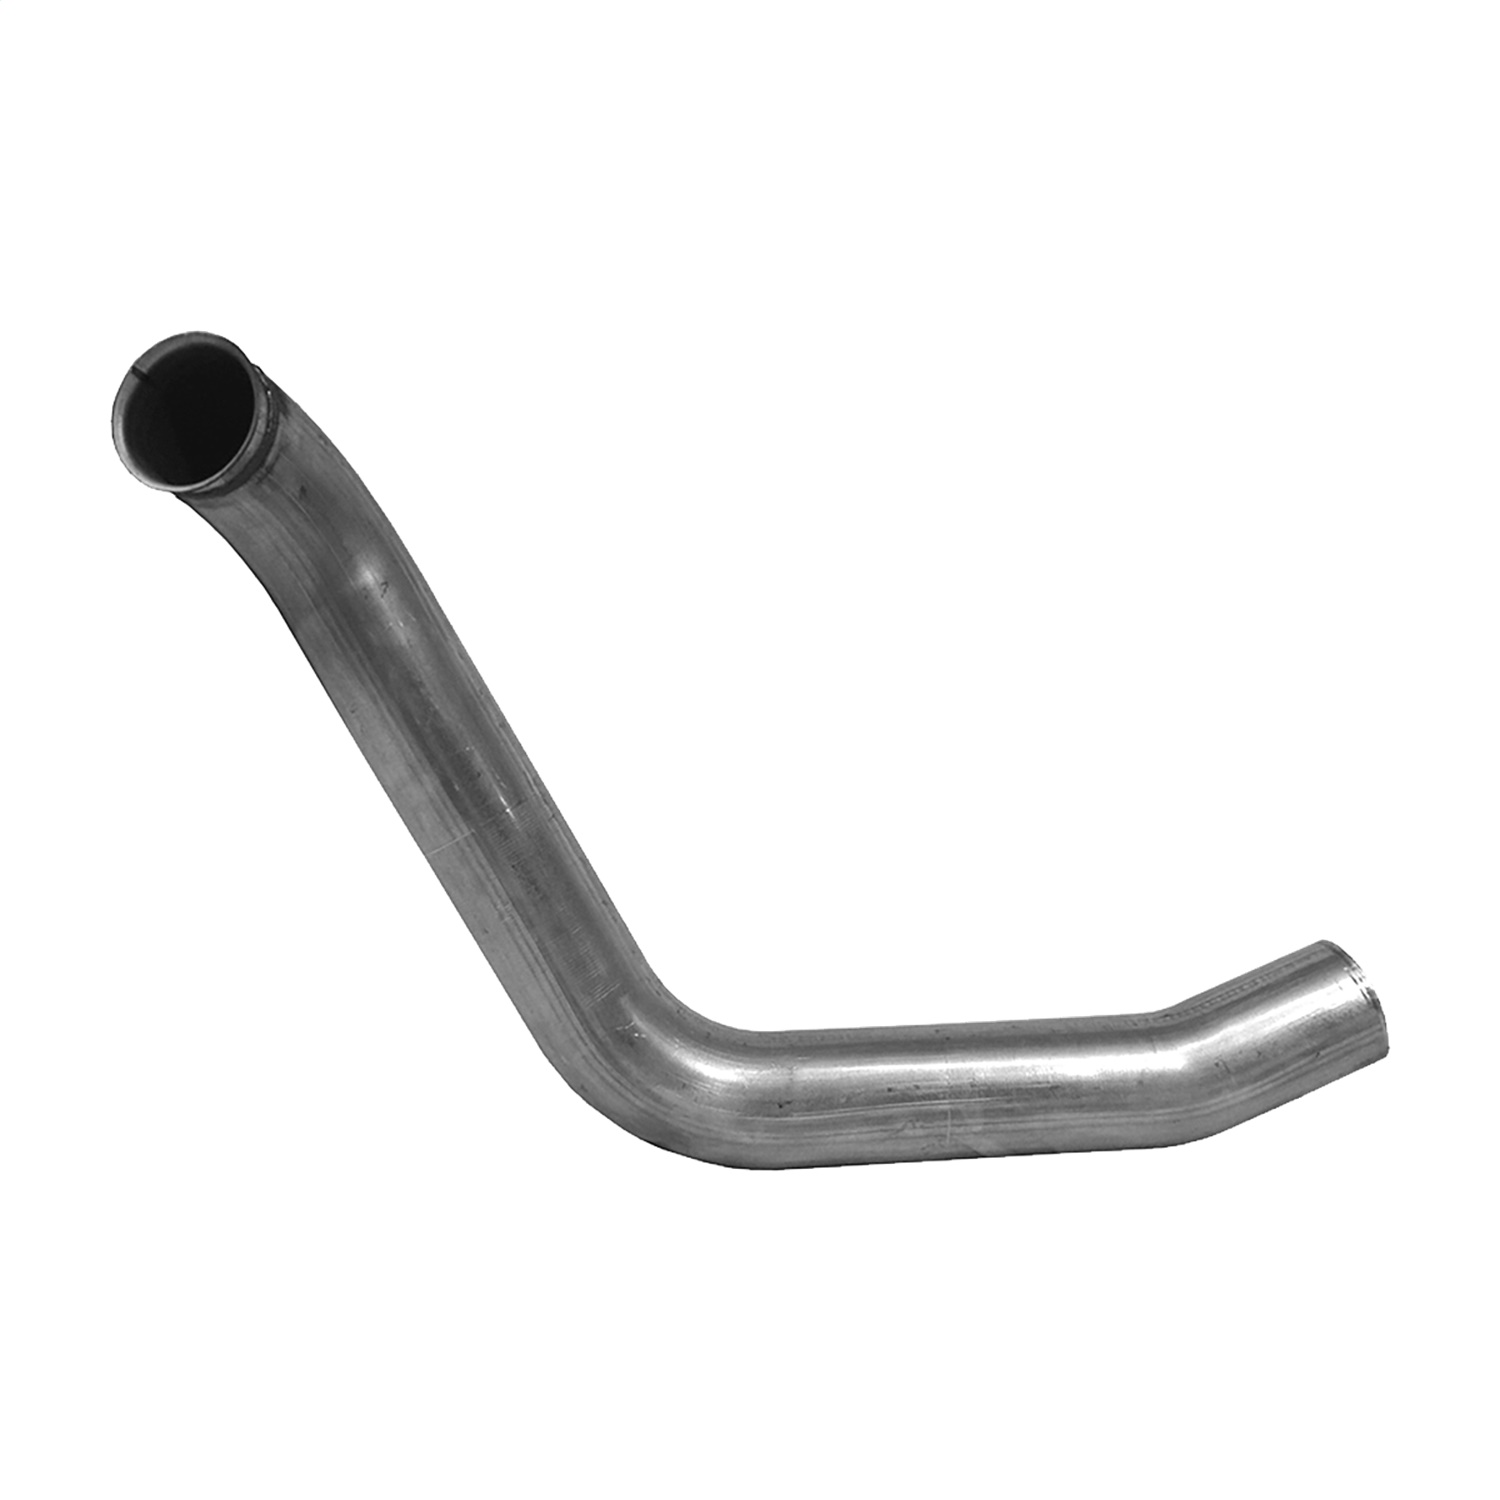 MBRP Exhaust MBRP Exhaust FAL401 Down Pipe Fits 99-03 F-250 Super Duty F-350 Super Duty